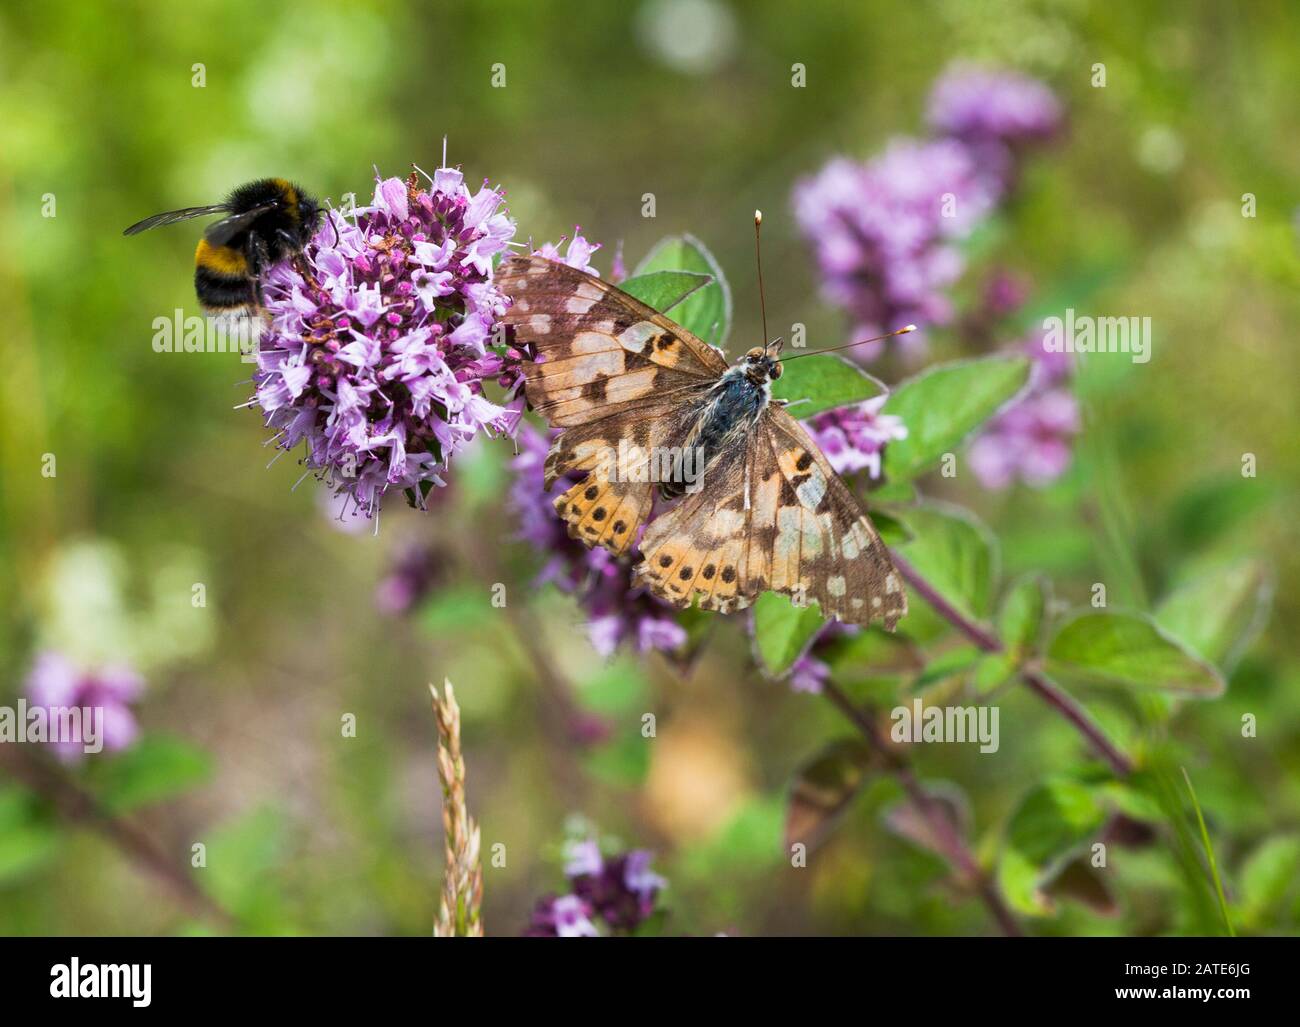 PAINTED LADY Butterfly and a BUMBLEBEE on a flower of Oregano Stock Photo